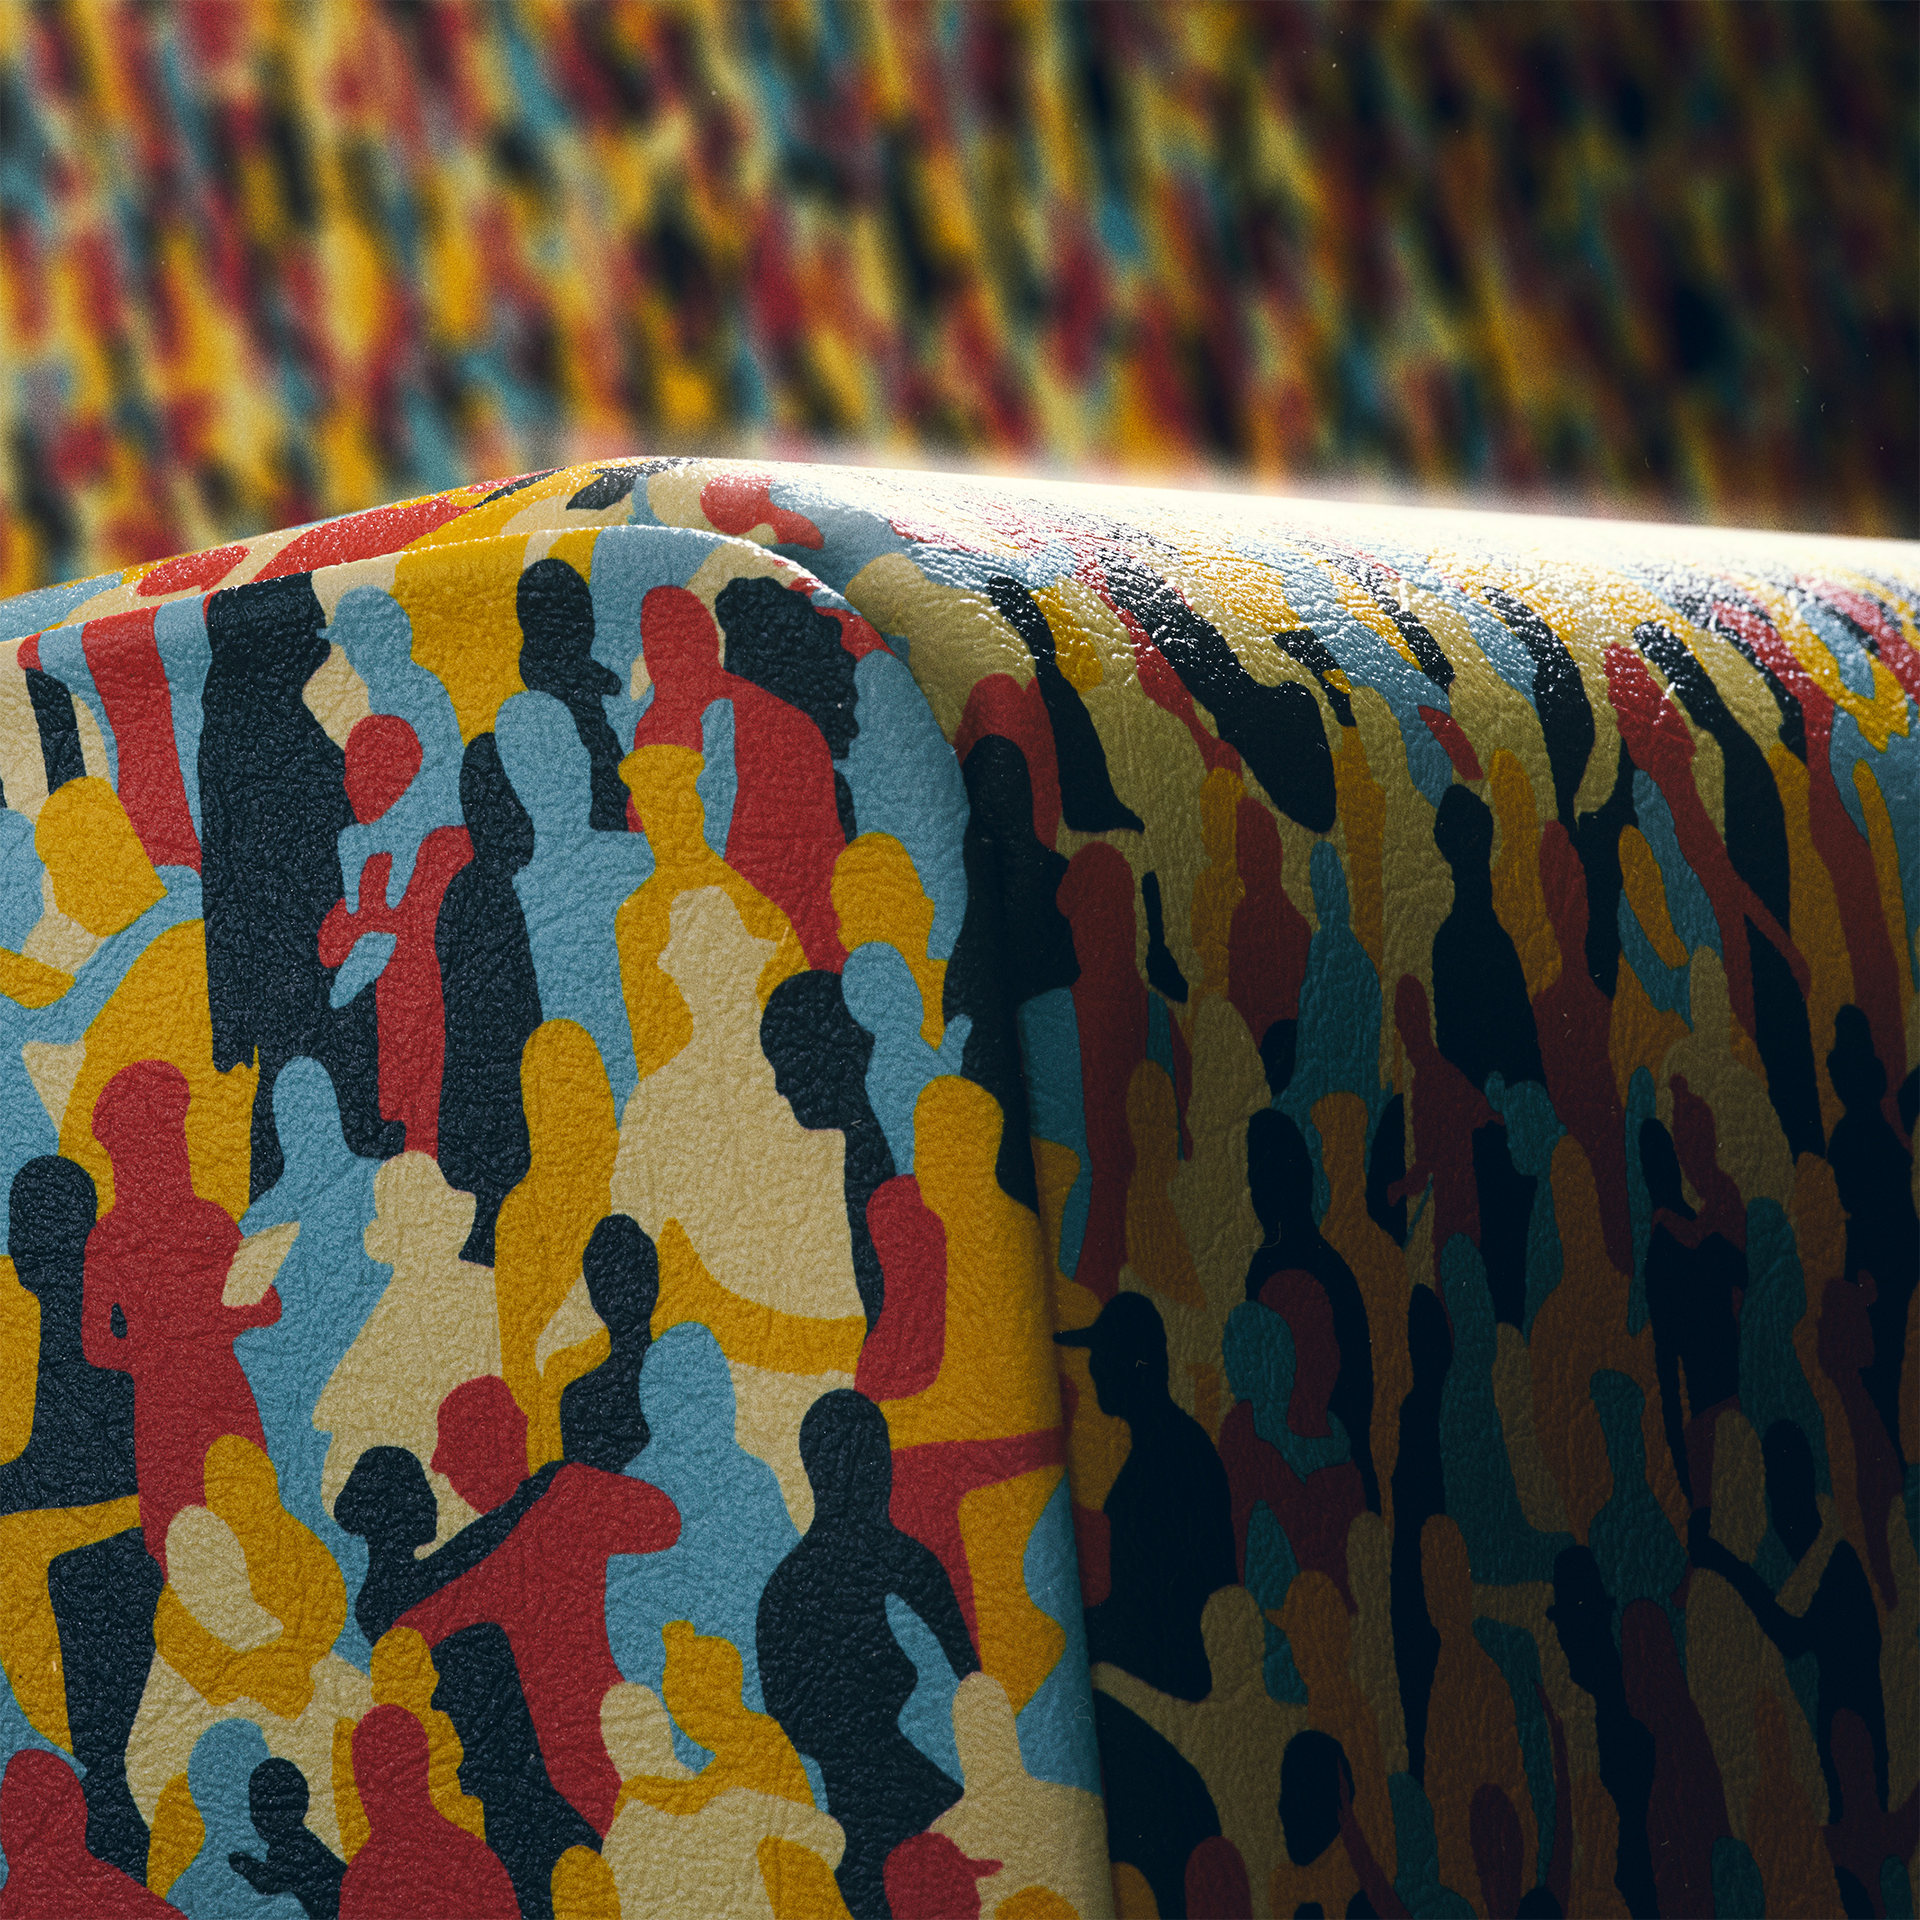 A close-up of a subway seat. the shiny material is made of the colorful silhouettes - The so-called Pattern of Tolerance, part of Jung von Matt’s Campaign for BVG, Berlin’s public transport company.